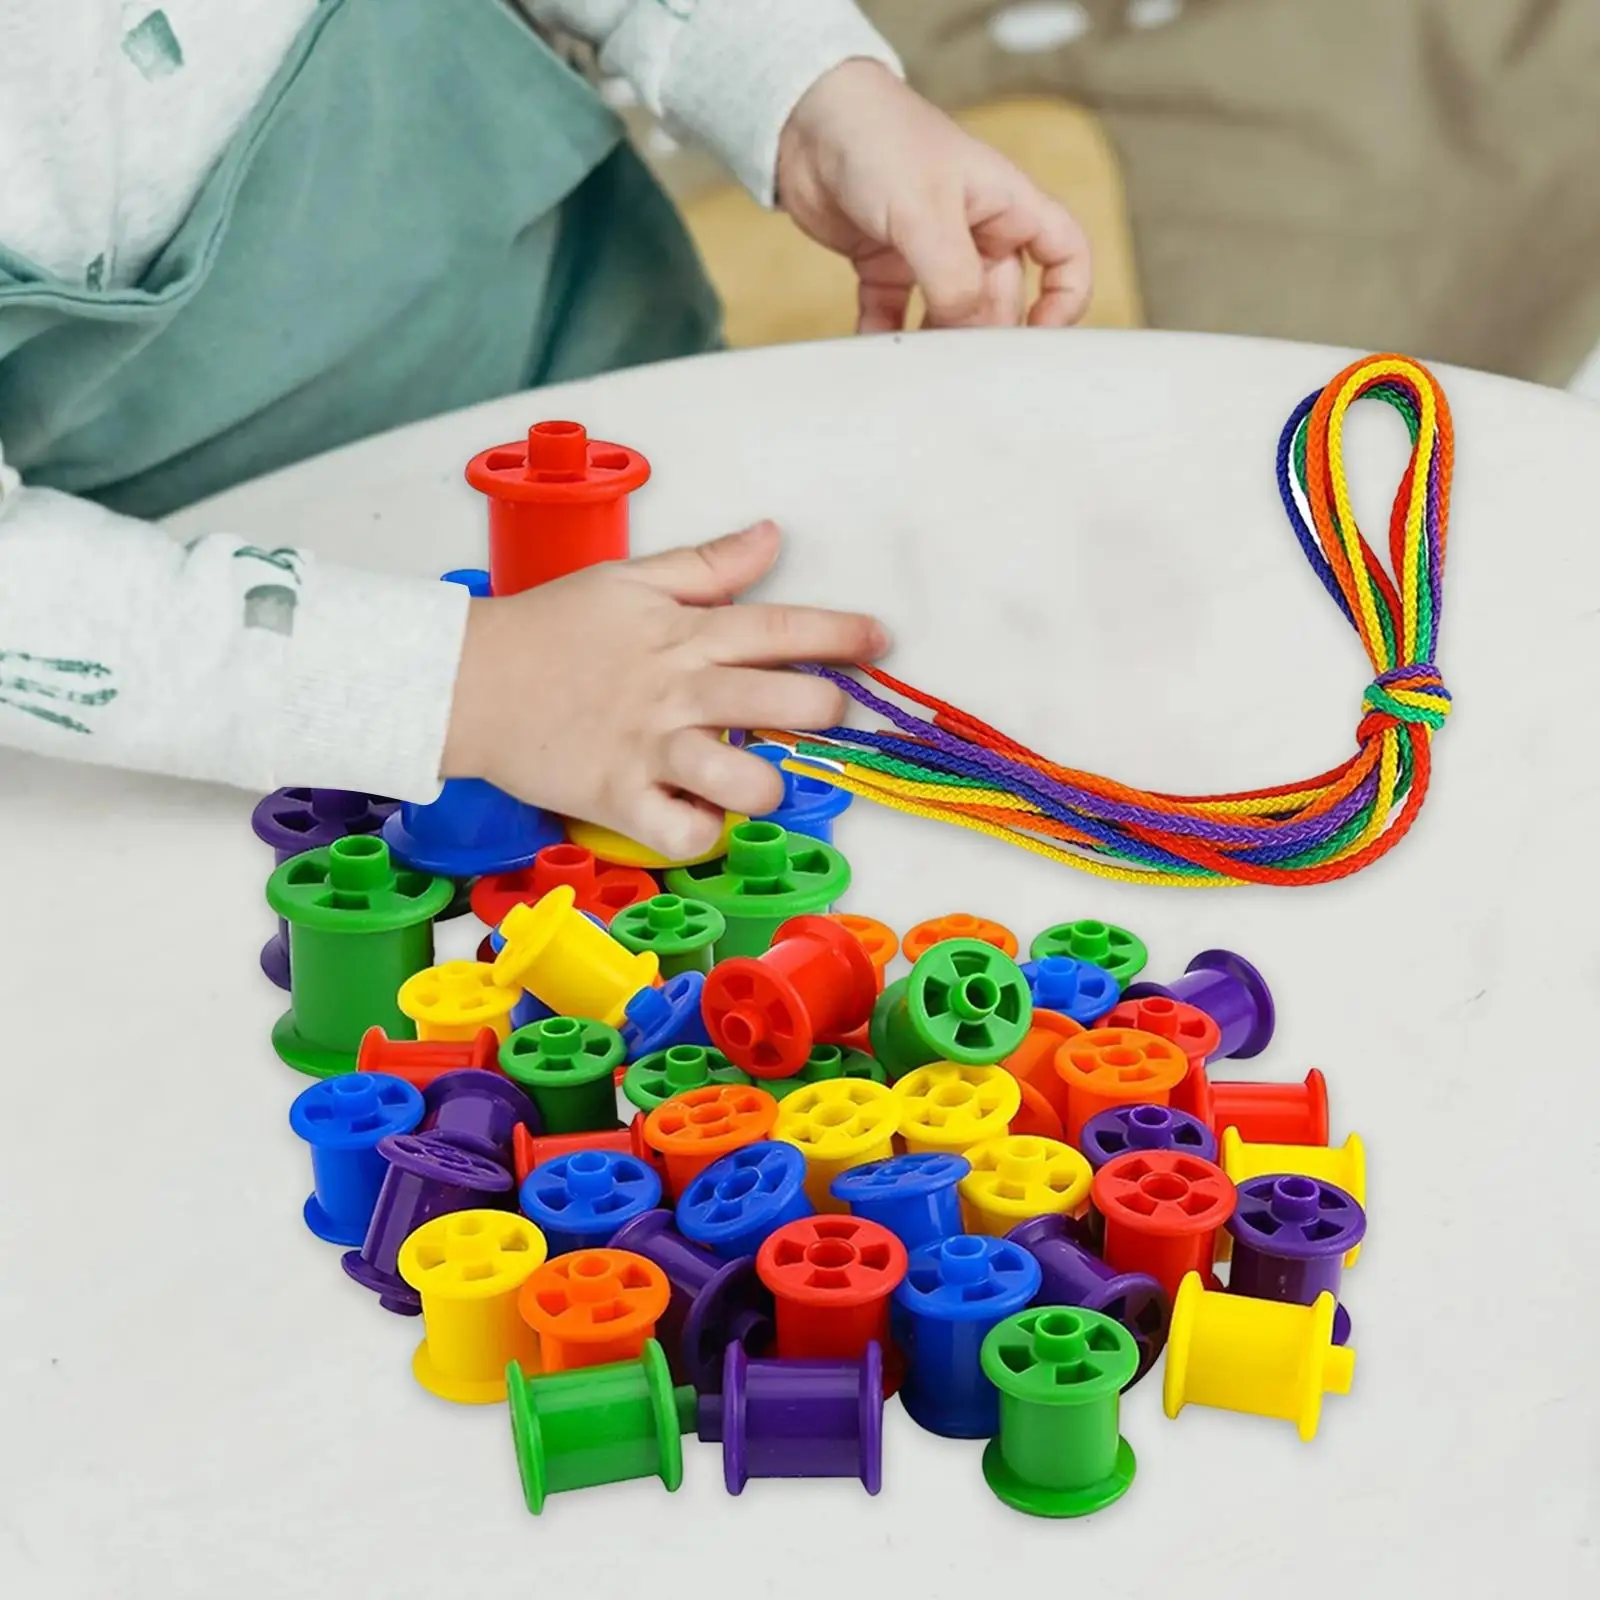 Lacing Beads Toy Early Education Cognition Gifts for Kindergarten Daycare